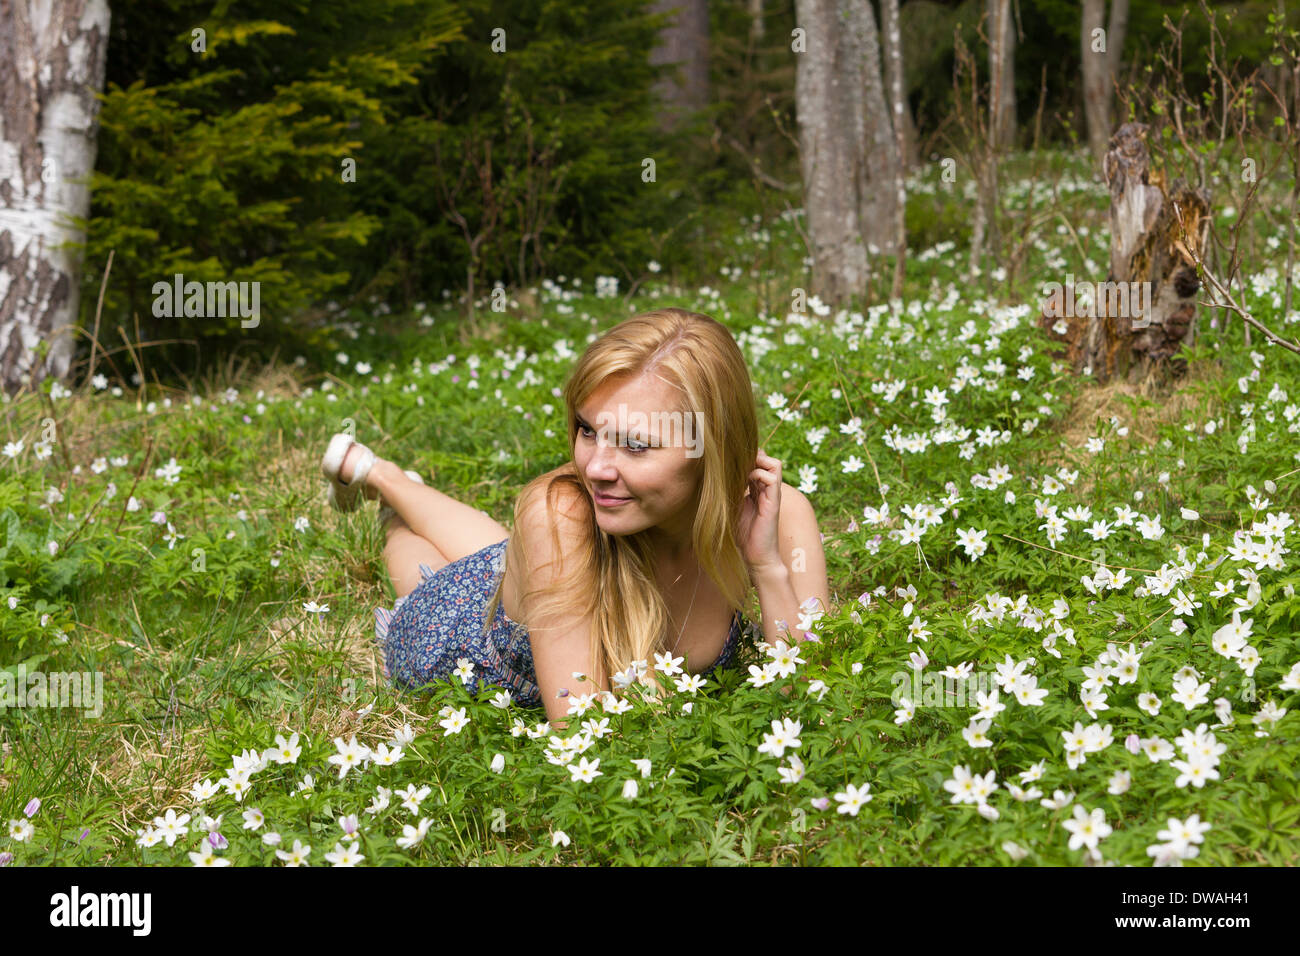 Young pretty blond woman on a meadow with flowers Stock Photo